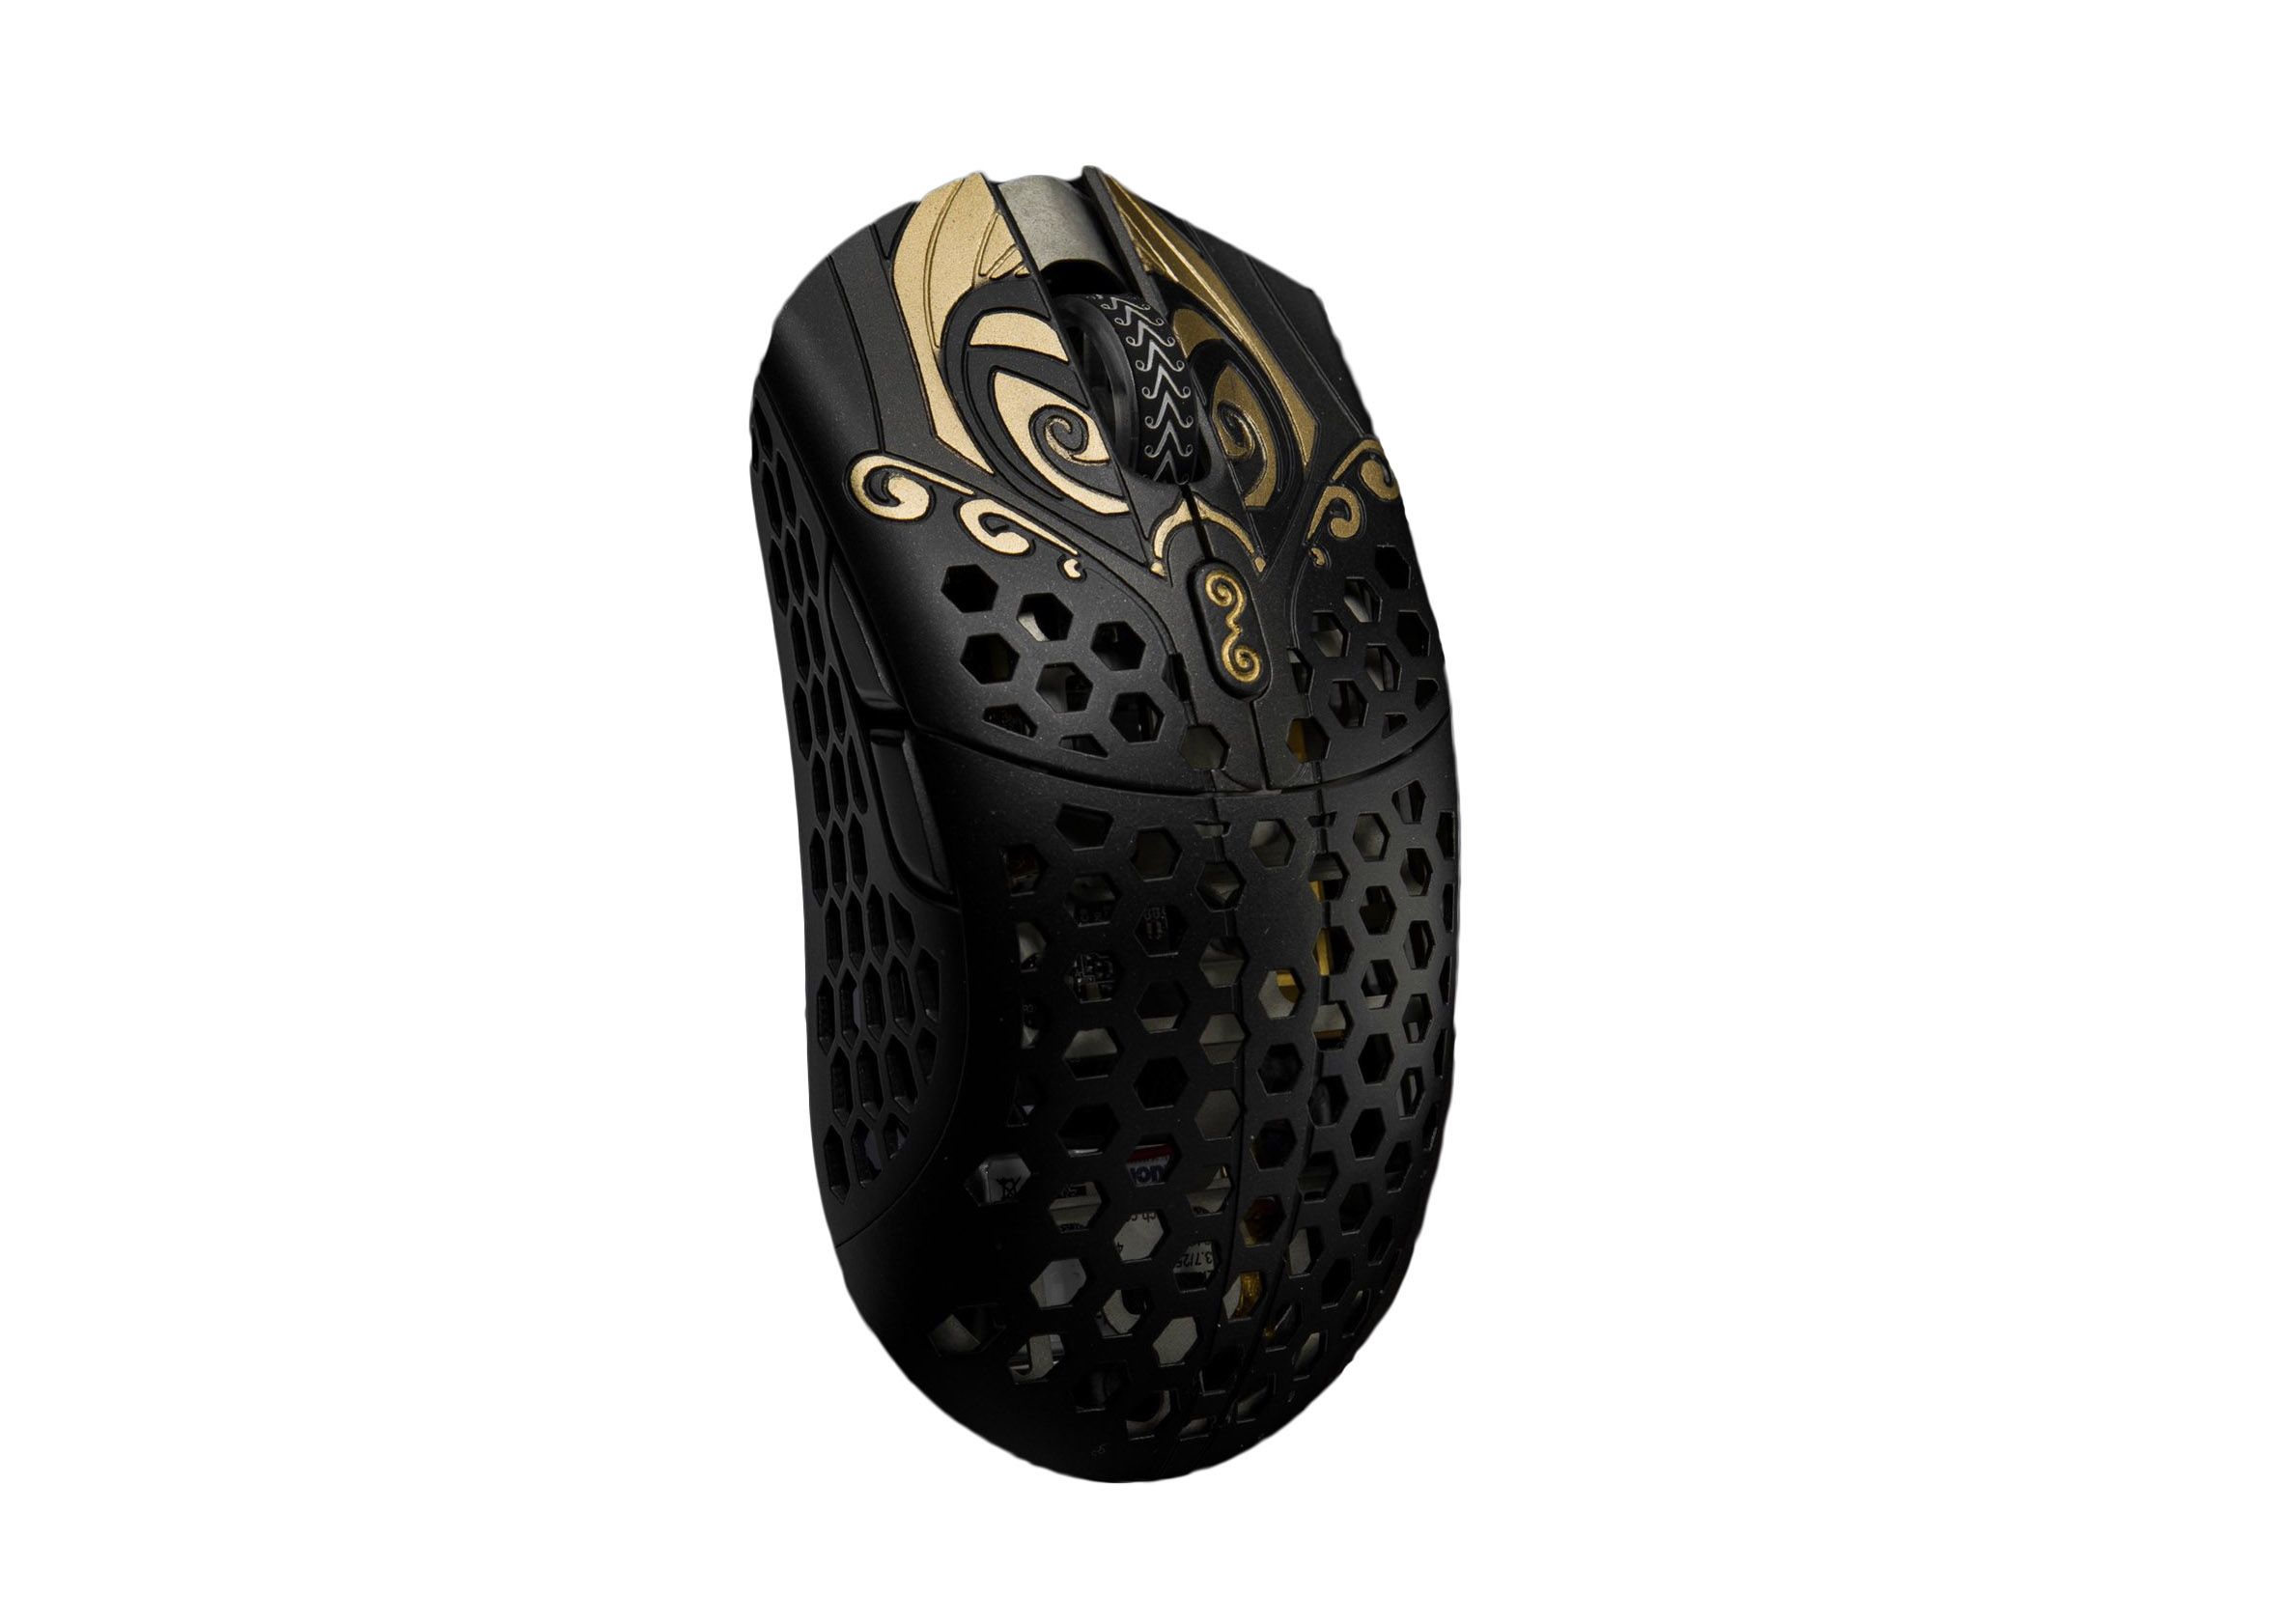 Finalmouse Starlight-12 Wireless Mouse Medium Hades King of the